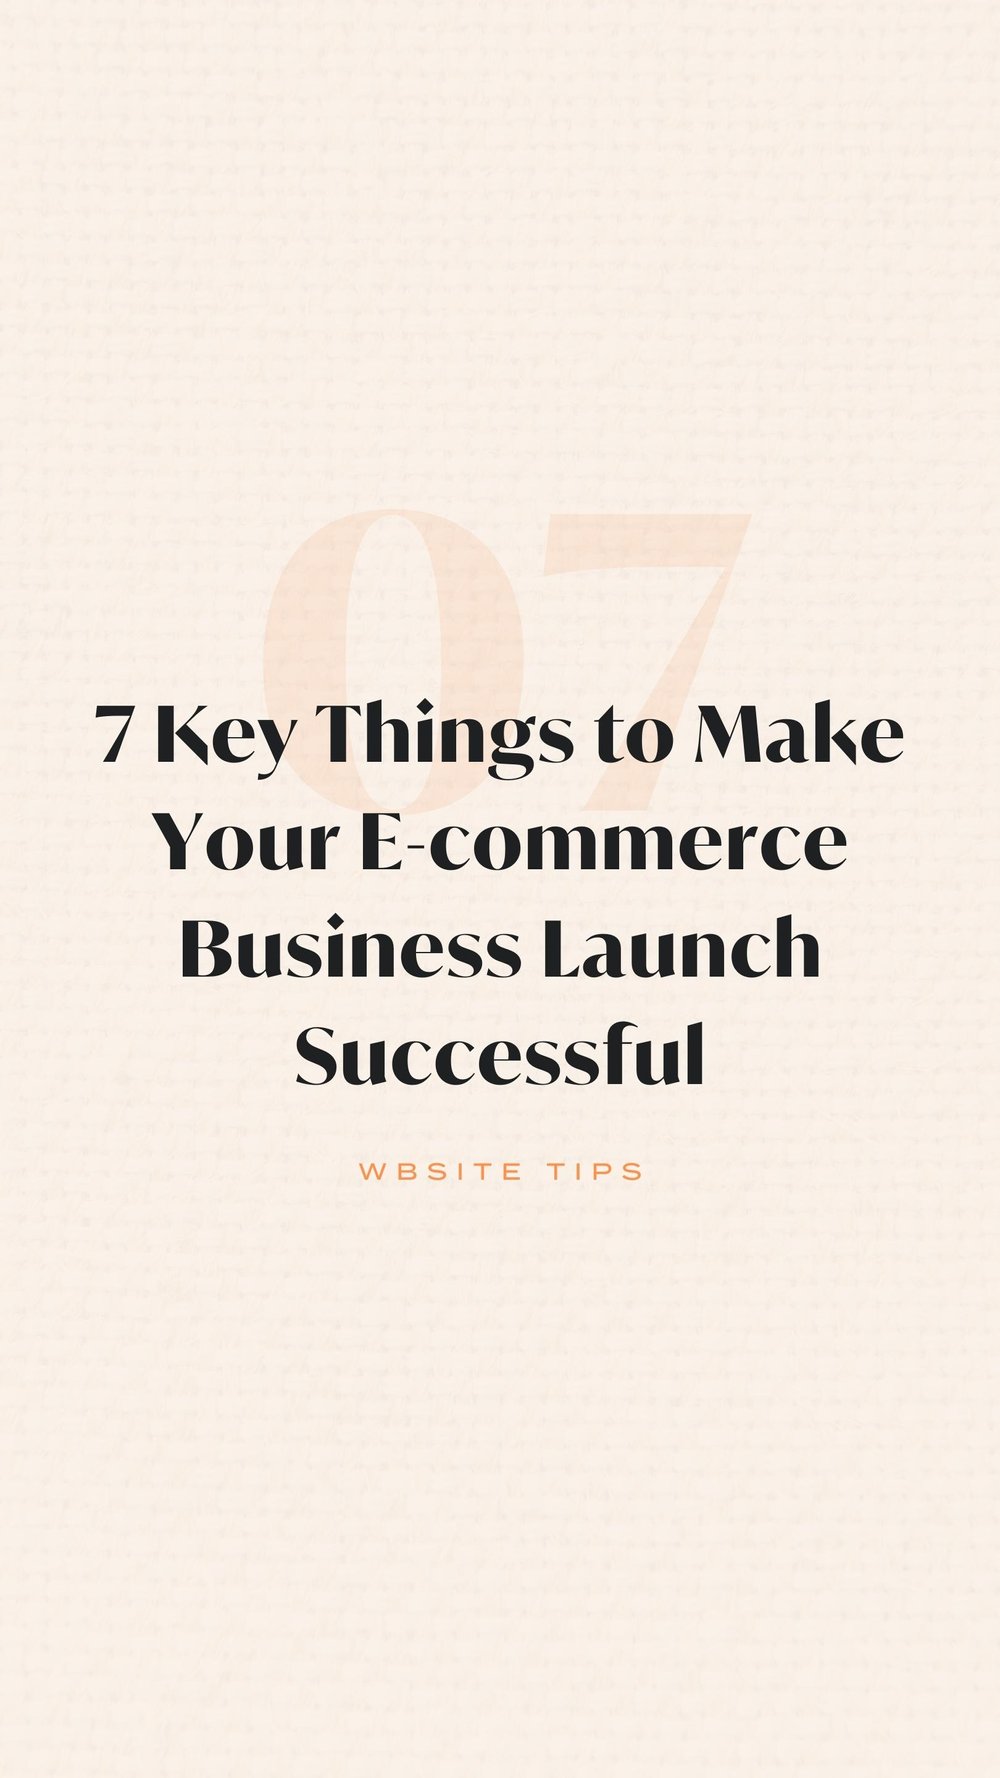 7 Key Things to Make Your E-commerce Business Launch Successful